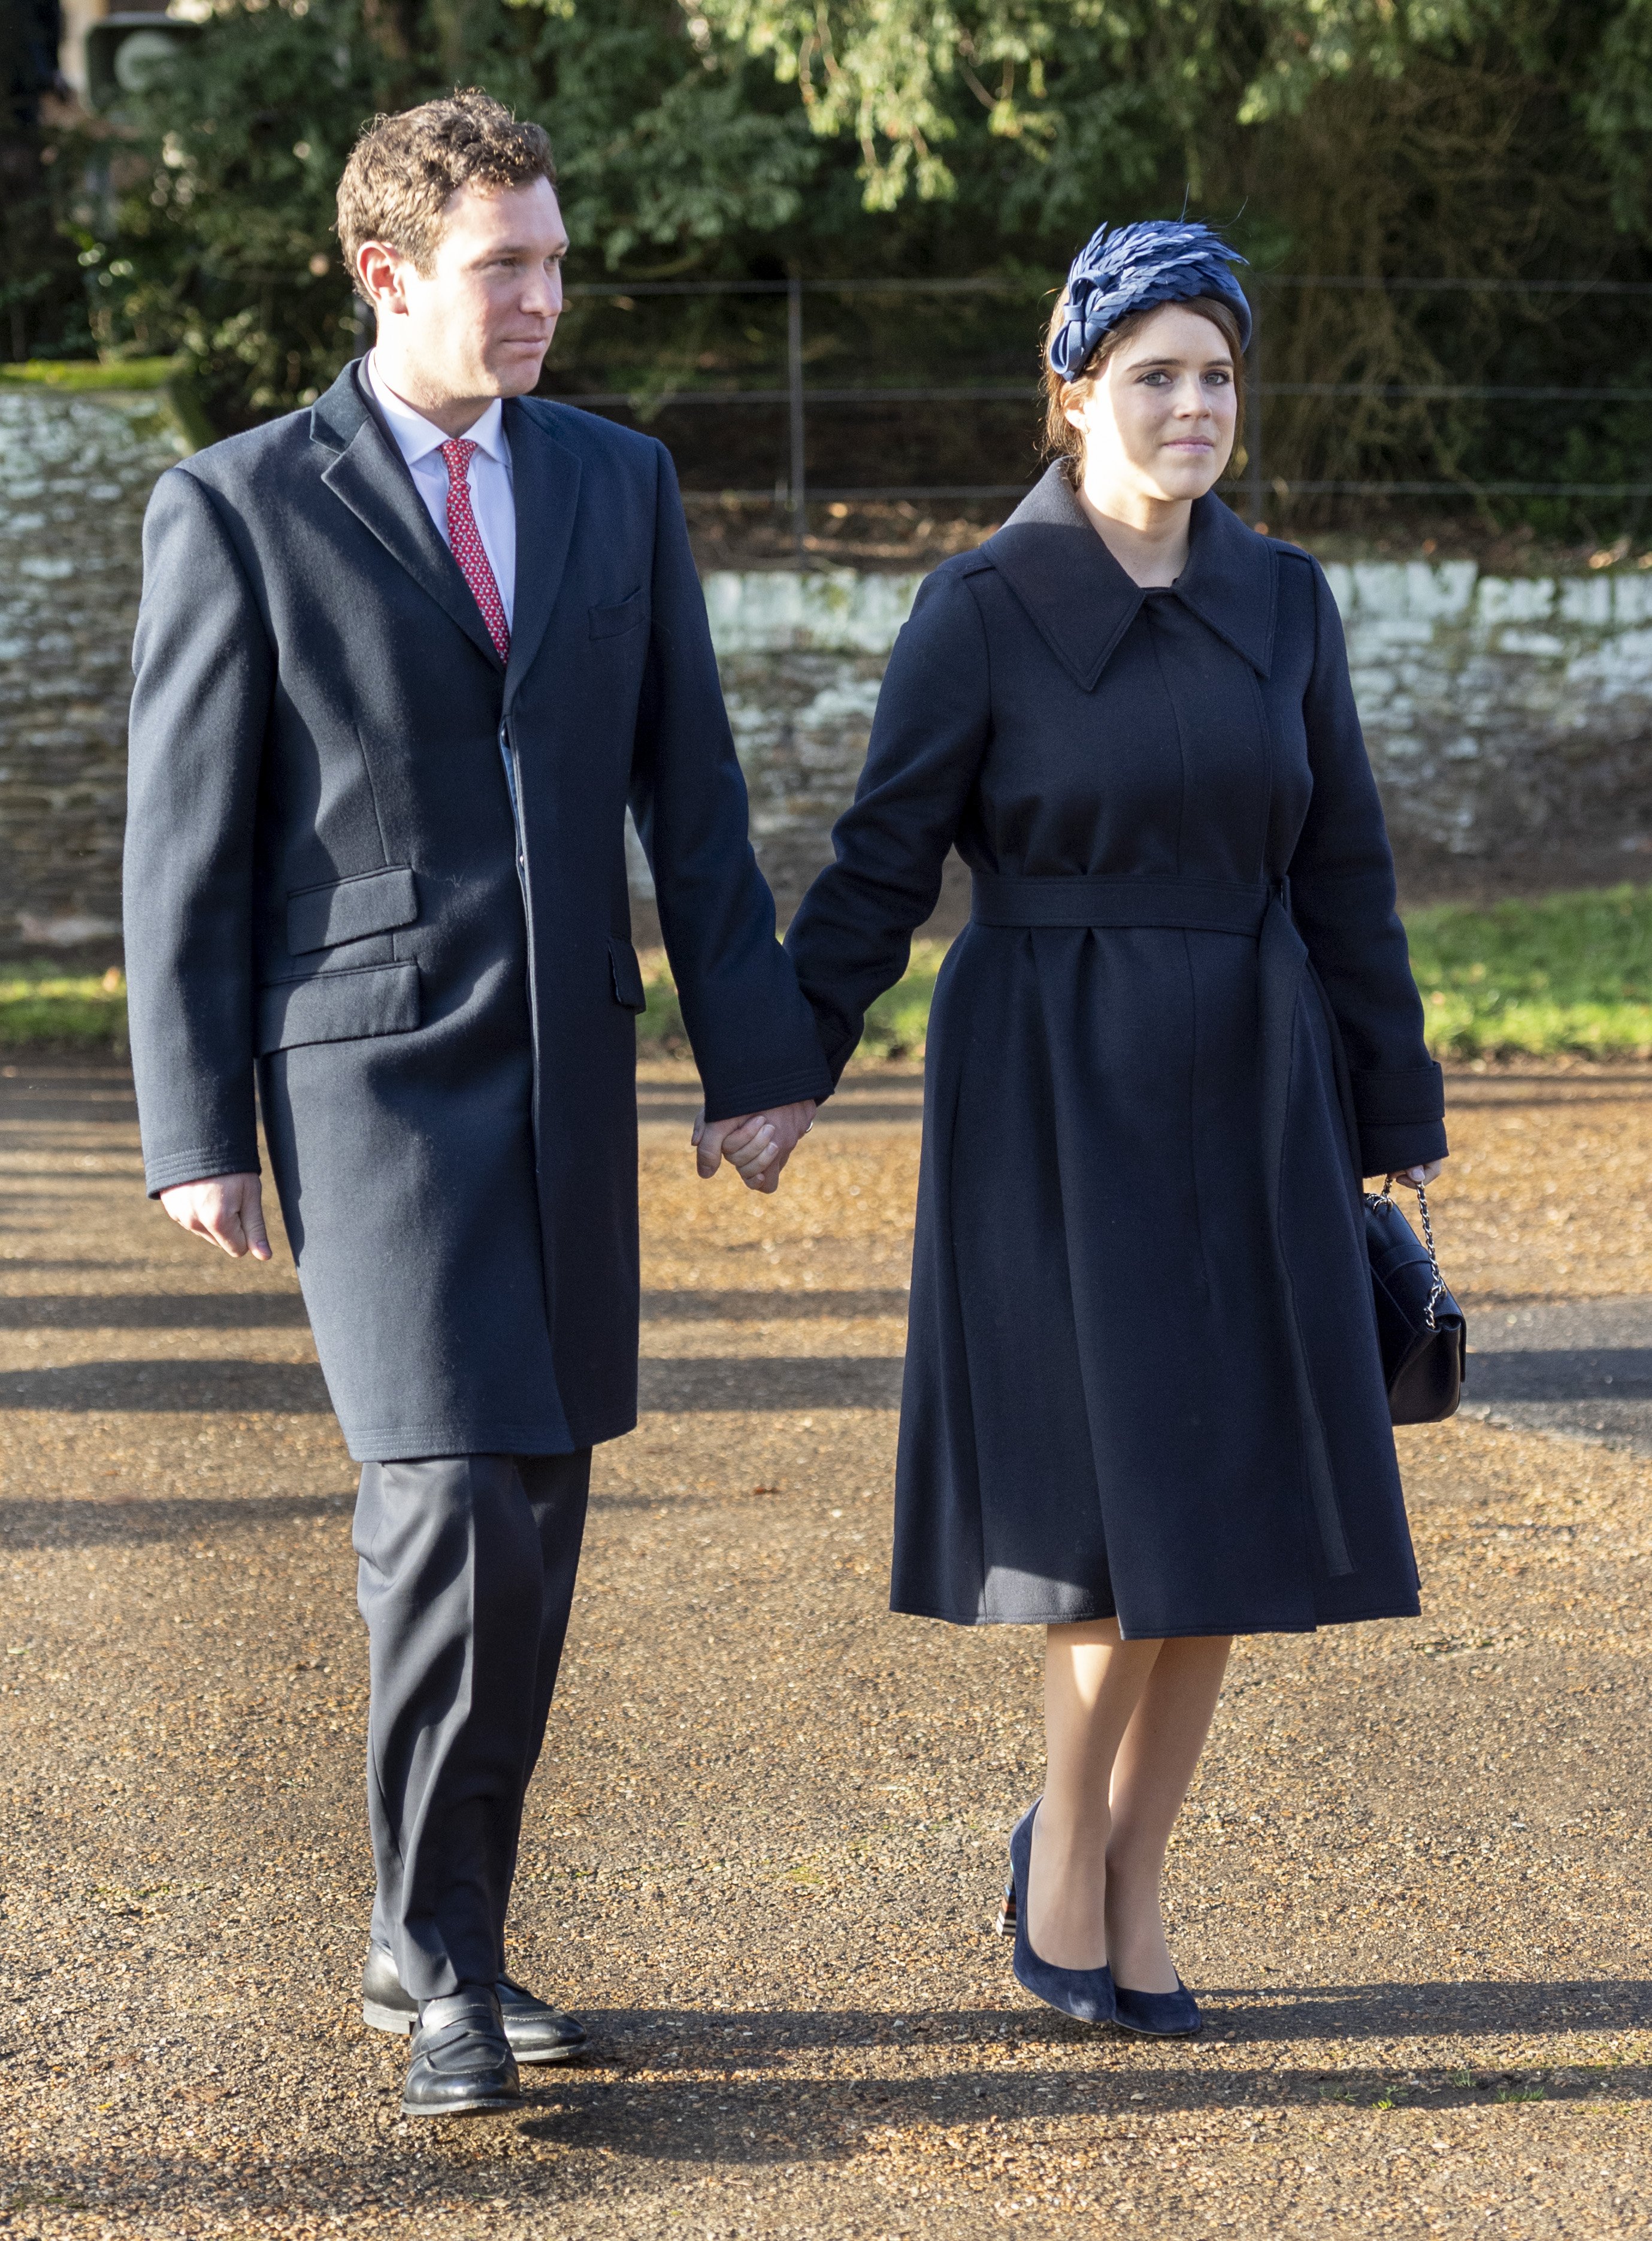 Princess Eugenie and her husband, Jack Brooksbank attending Christmas Day service in Sandringham, December, 2019. | Photo: Getty Images.